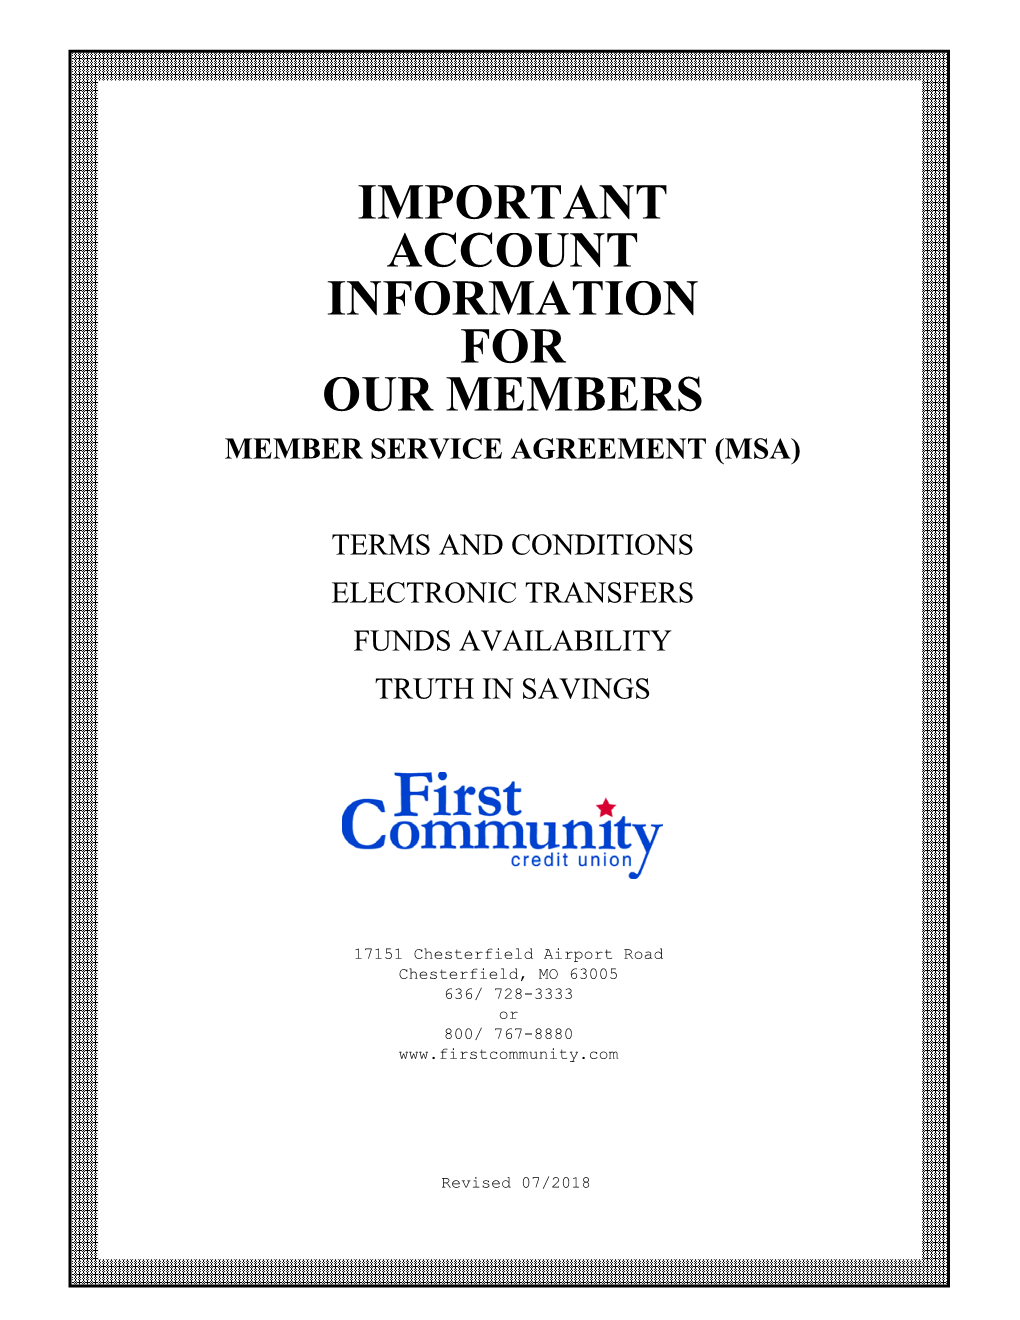 Important Account Information for Our Members Member Service Agreement (Msa)